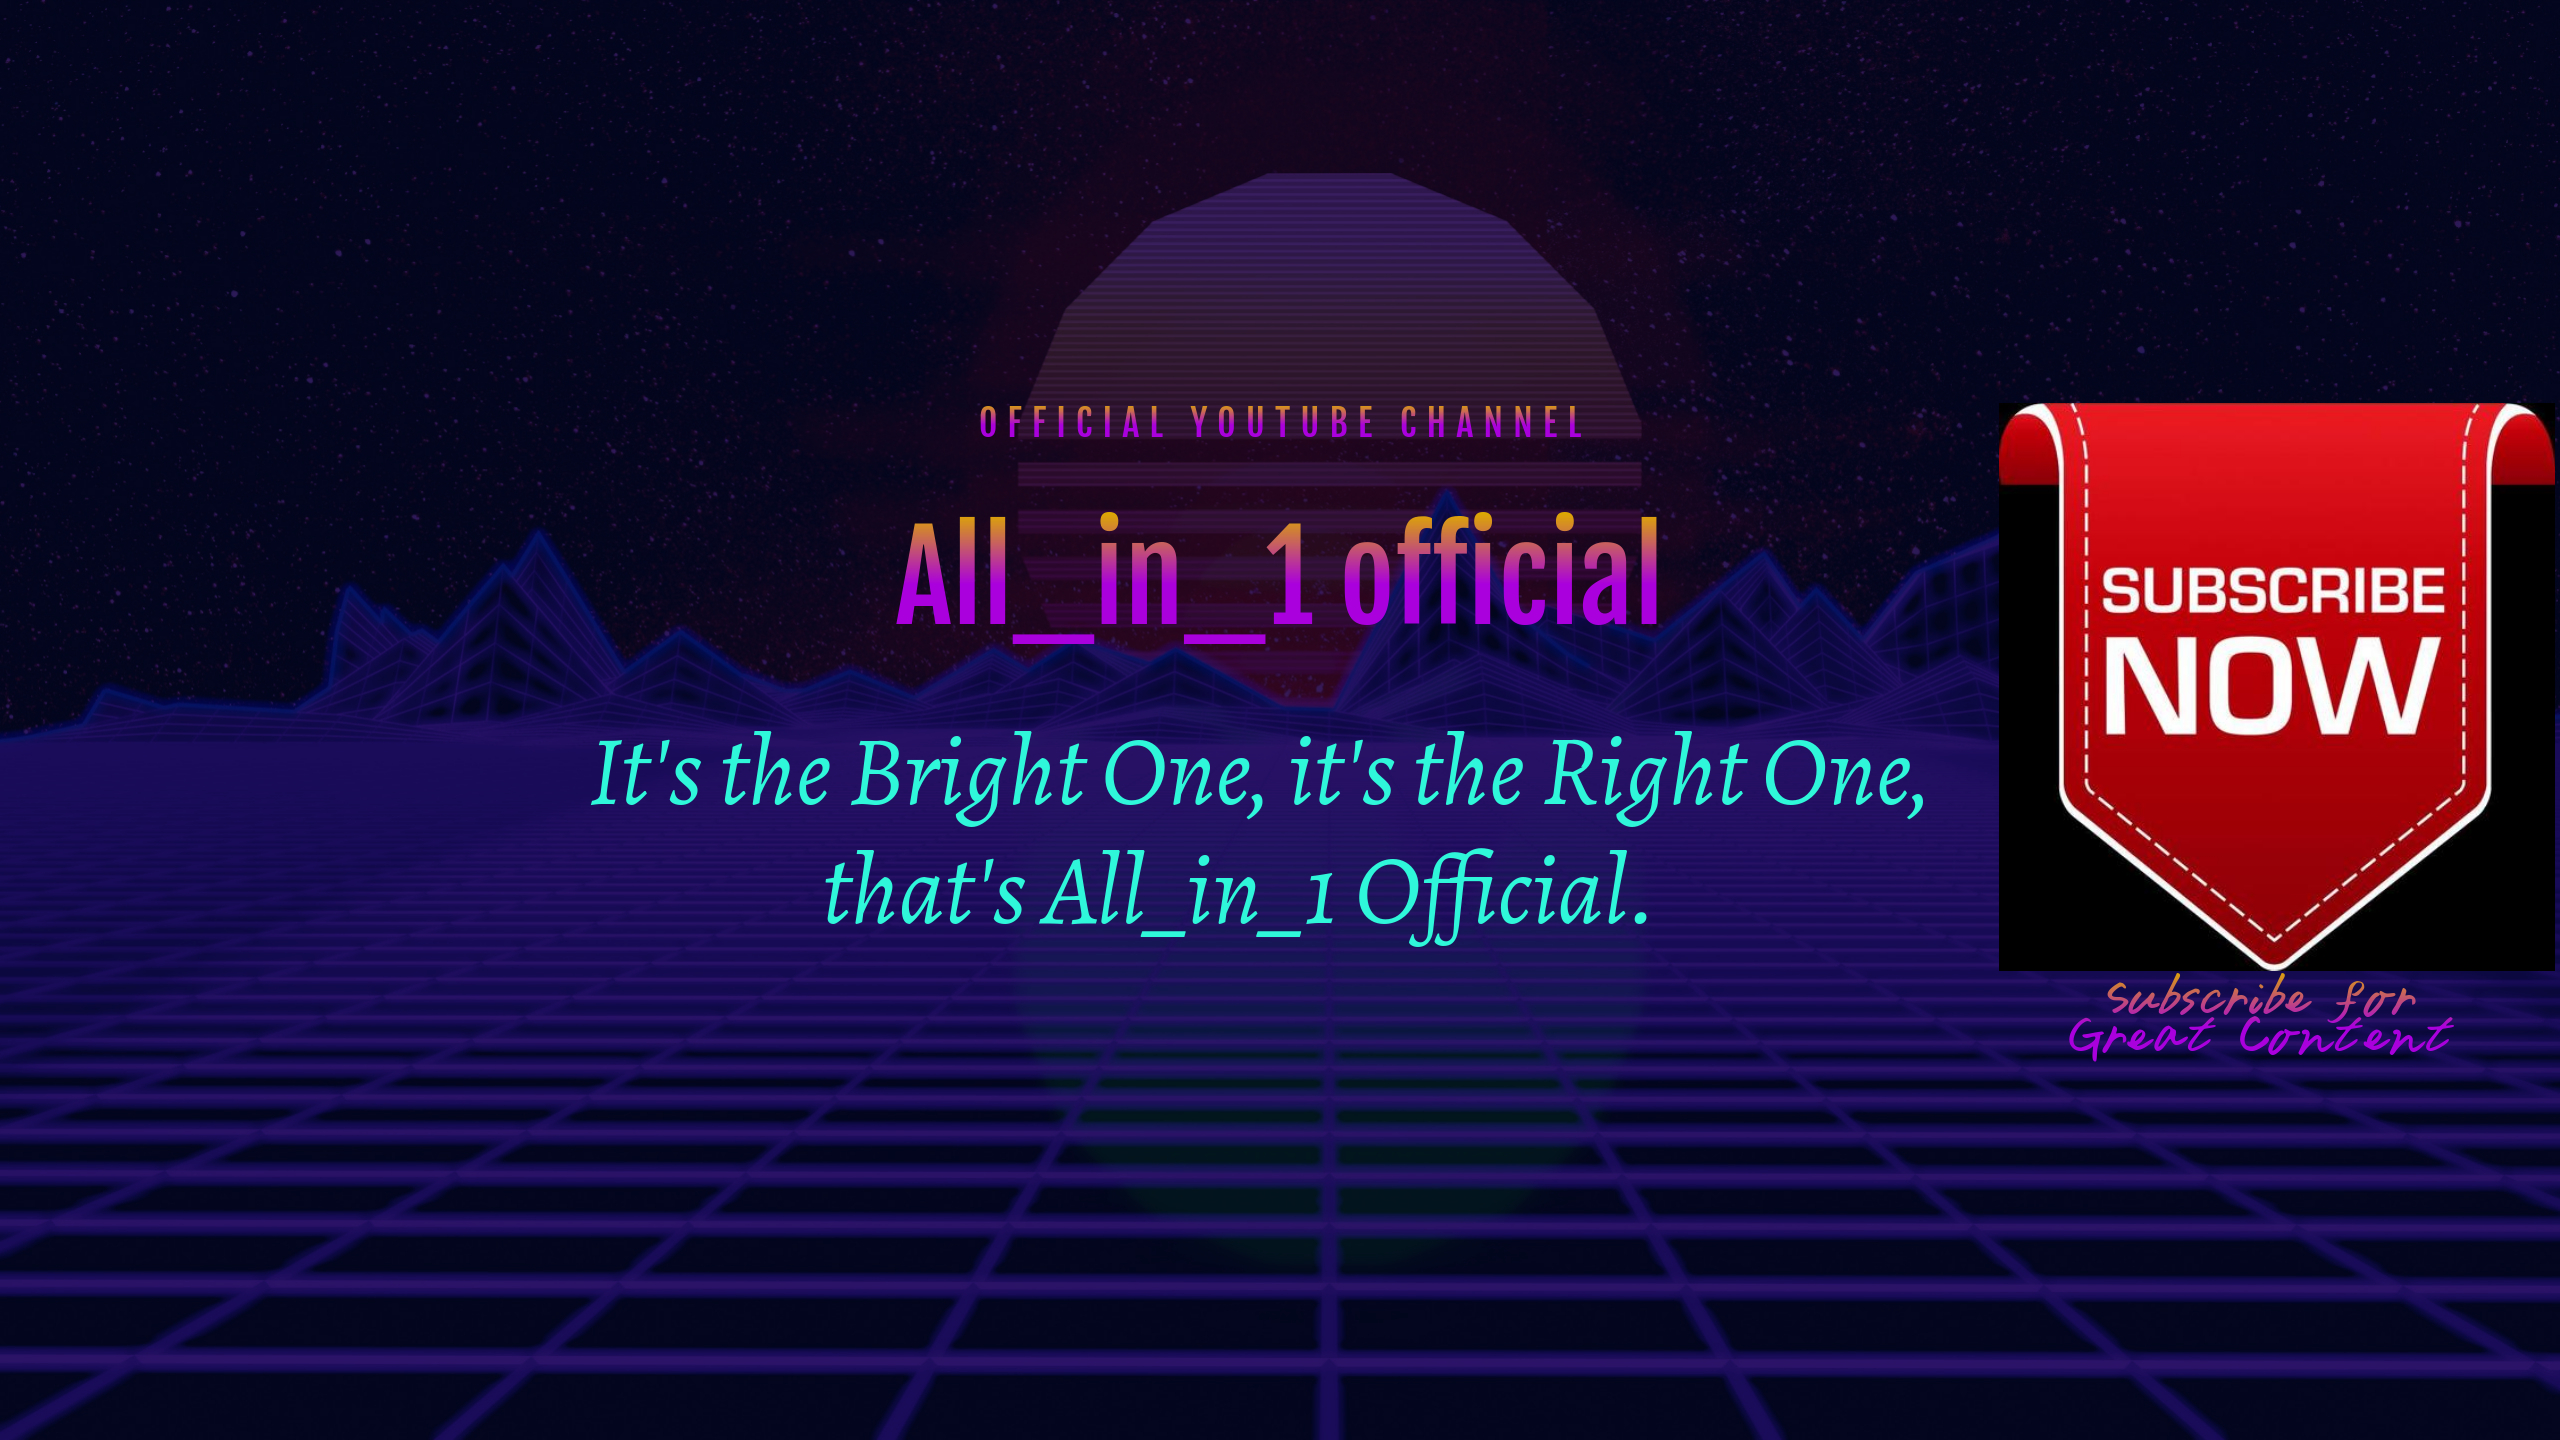 All_in_1 official